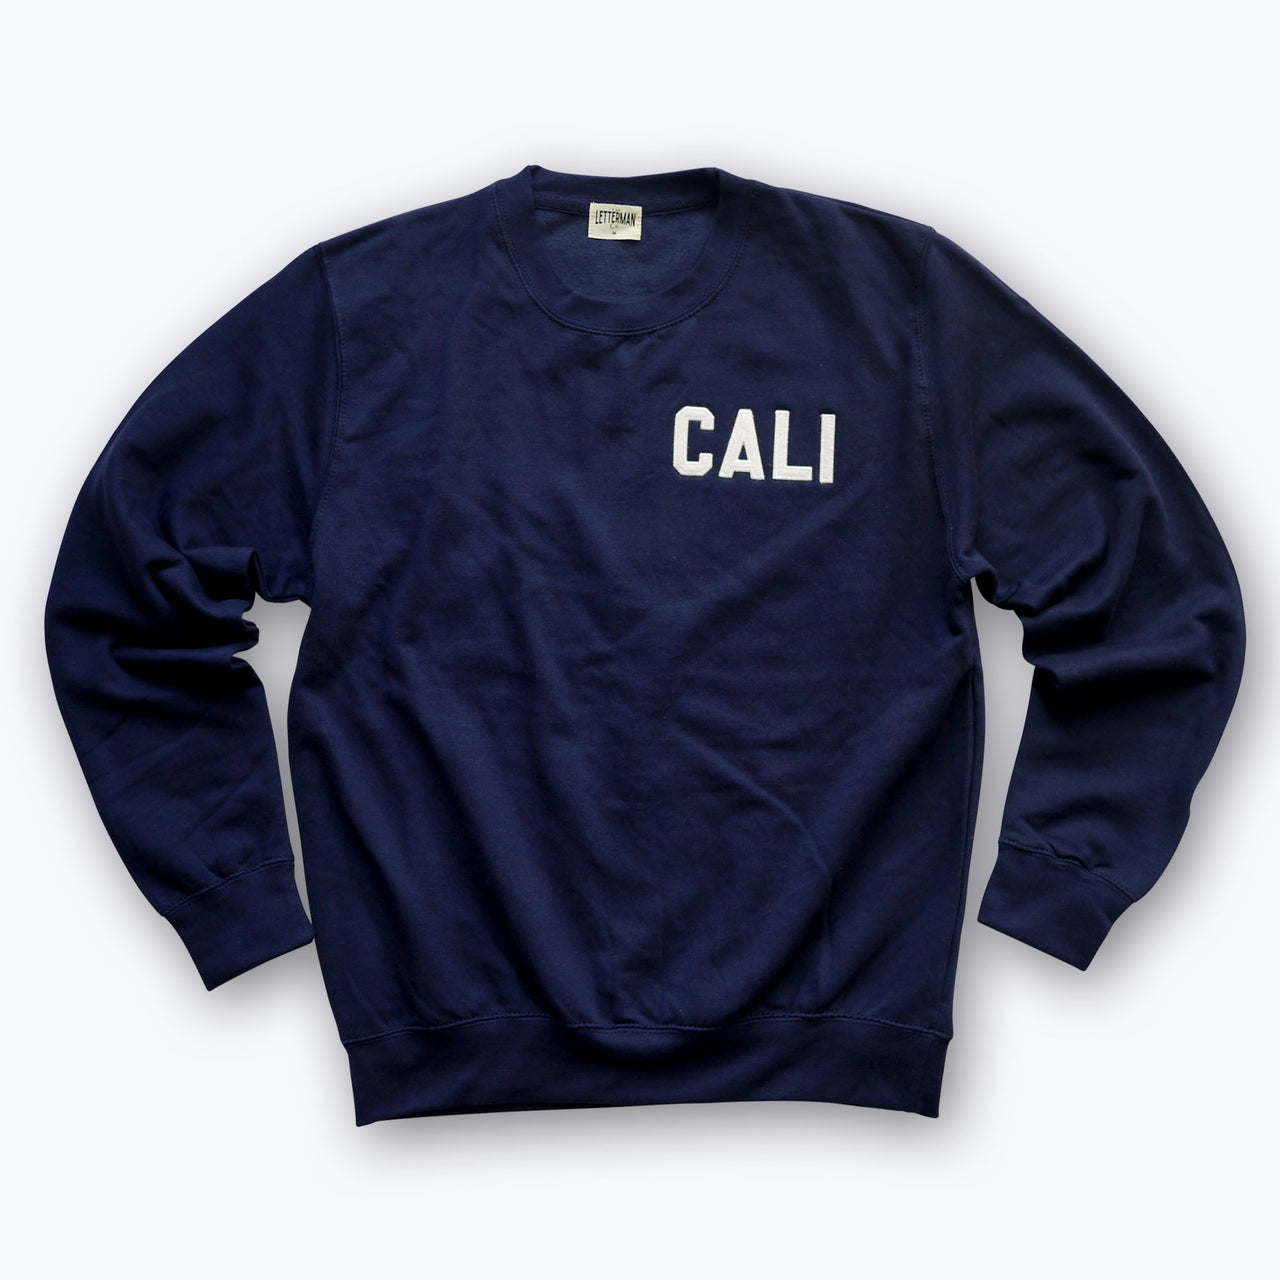 Personalized Adult Crew Neck Sweatshirt with Felt Letters